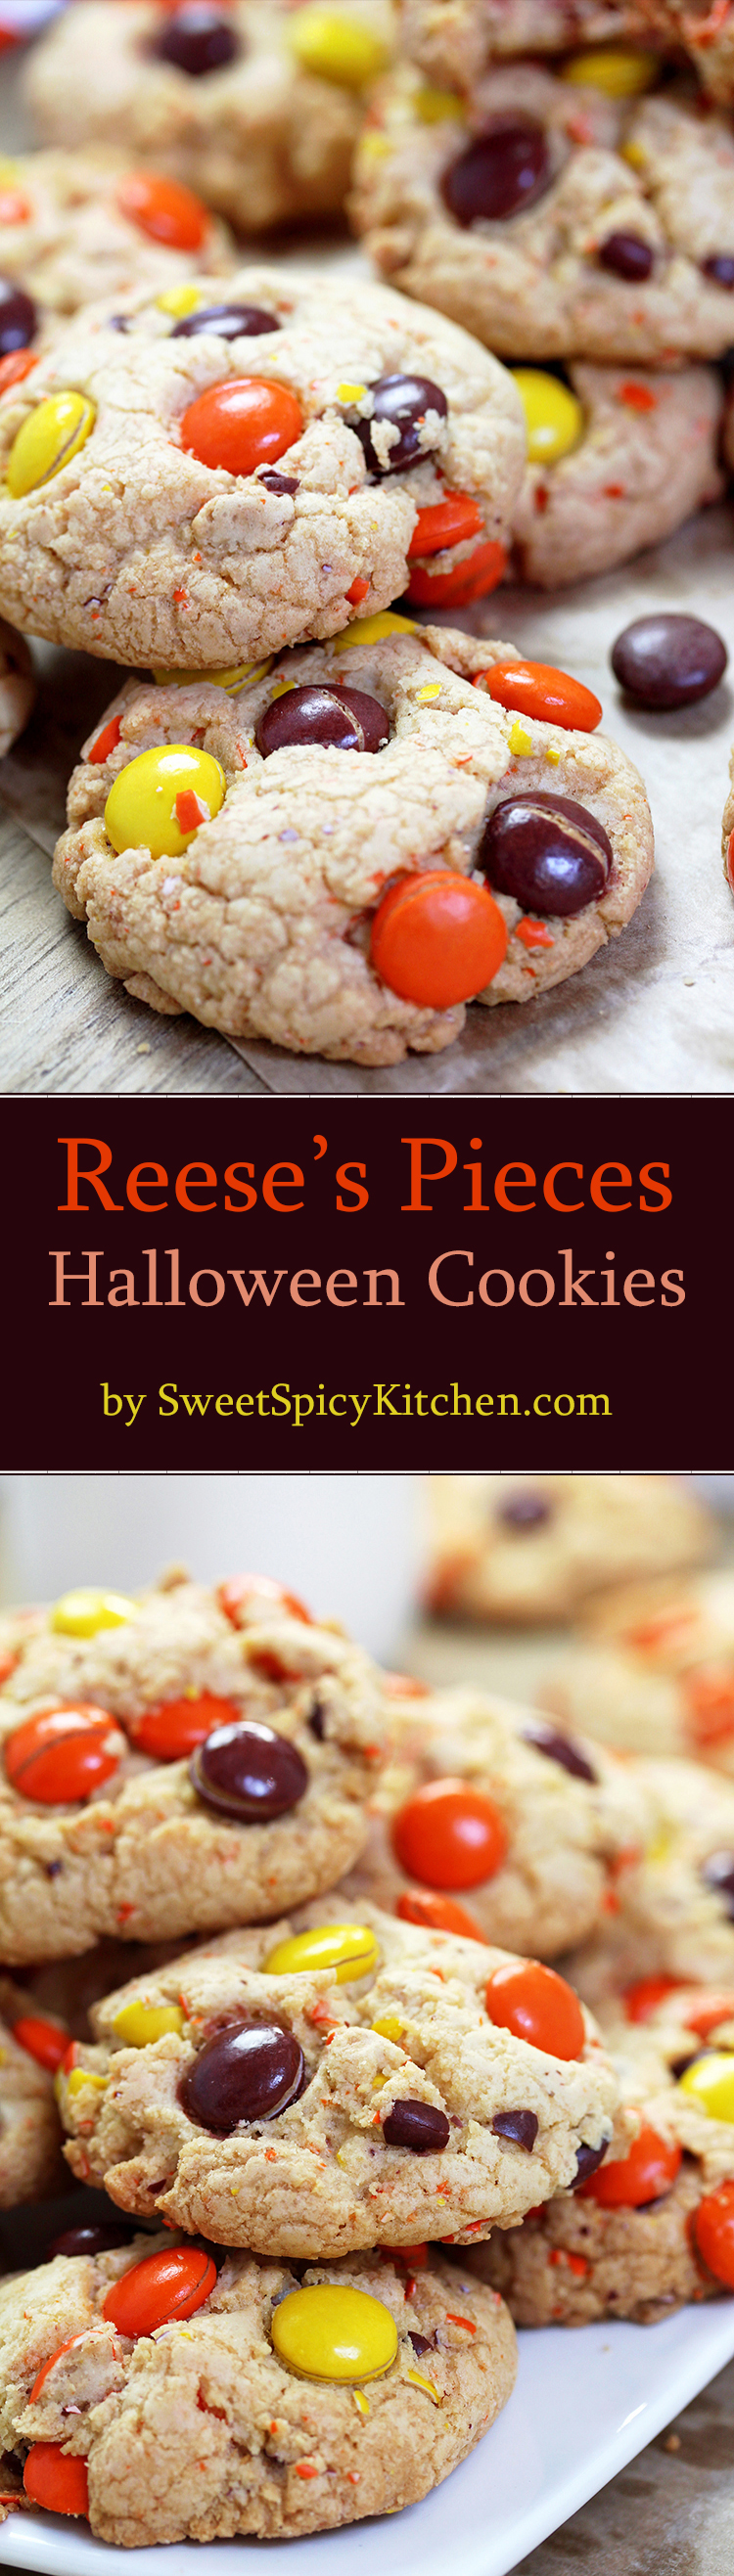 Reese‘s Pieces Cookies – crunchy outside, soft inside – perfect fall cookies in Halloween colors.